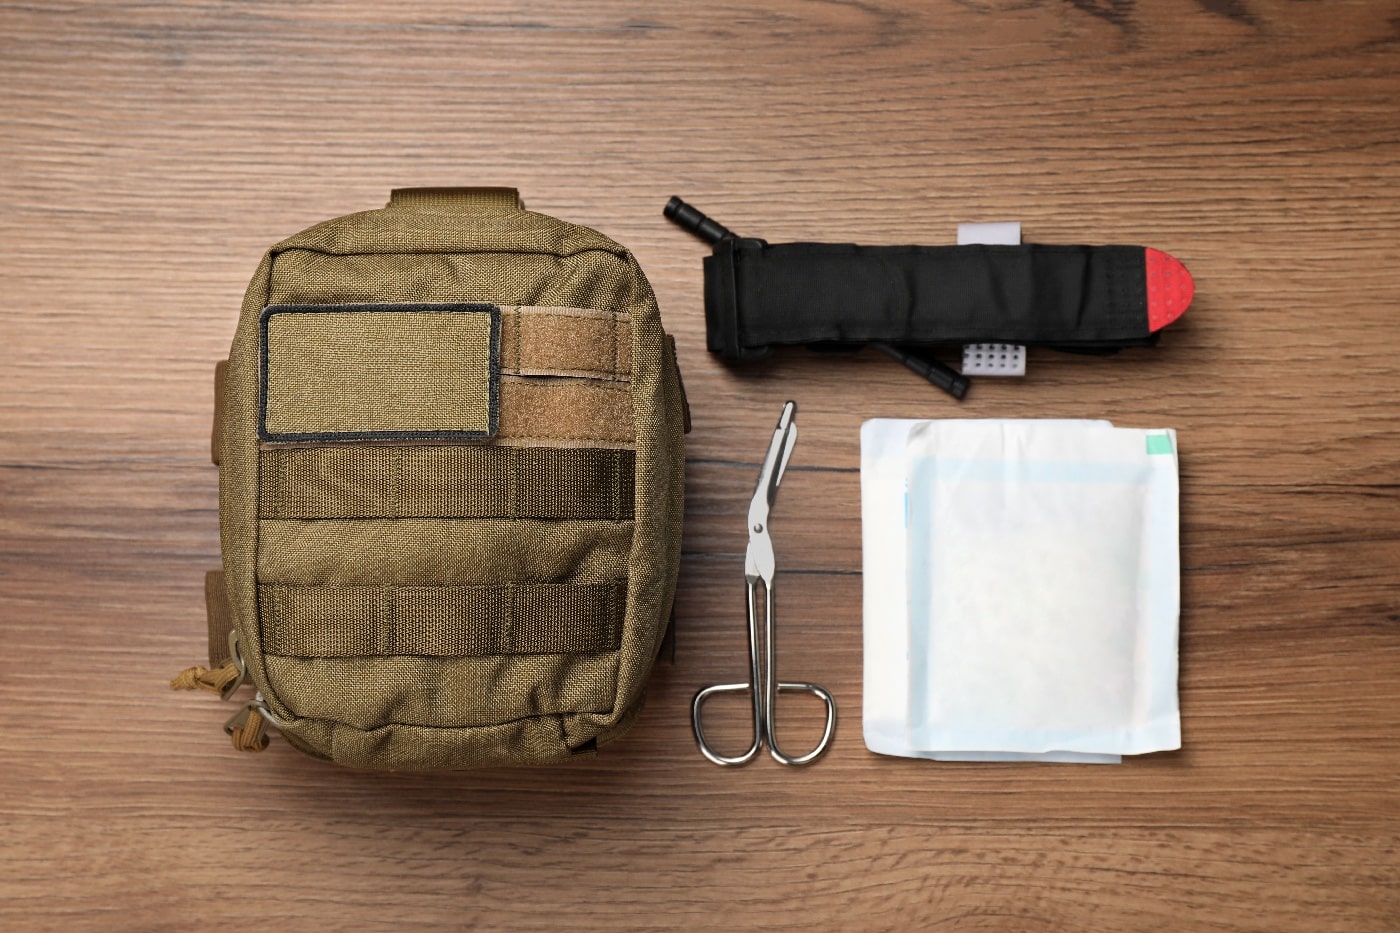 In this photograph, we see the author's TCCC kit for dealing with emergency medical trauma. It includes a tourniquet, sheers and a pressure bandage.